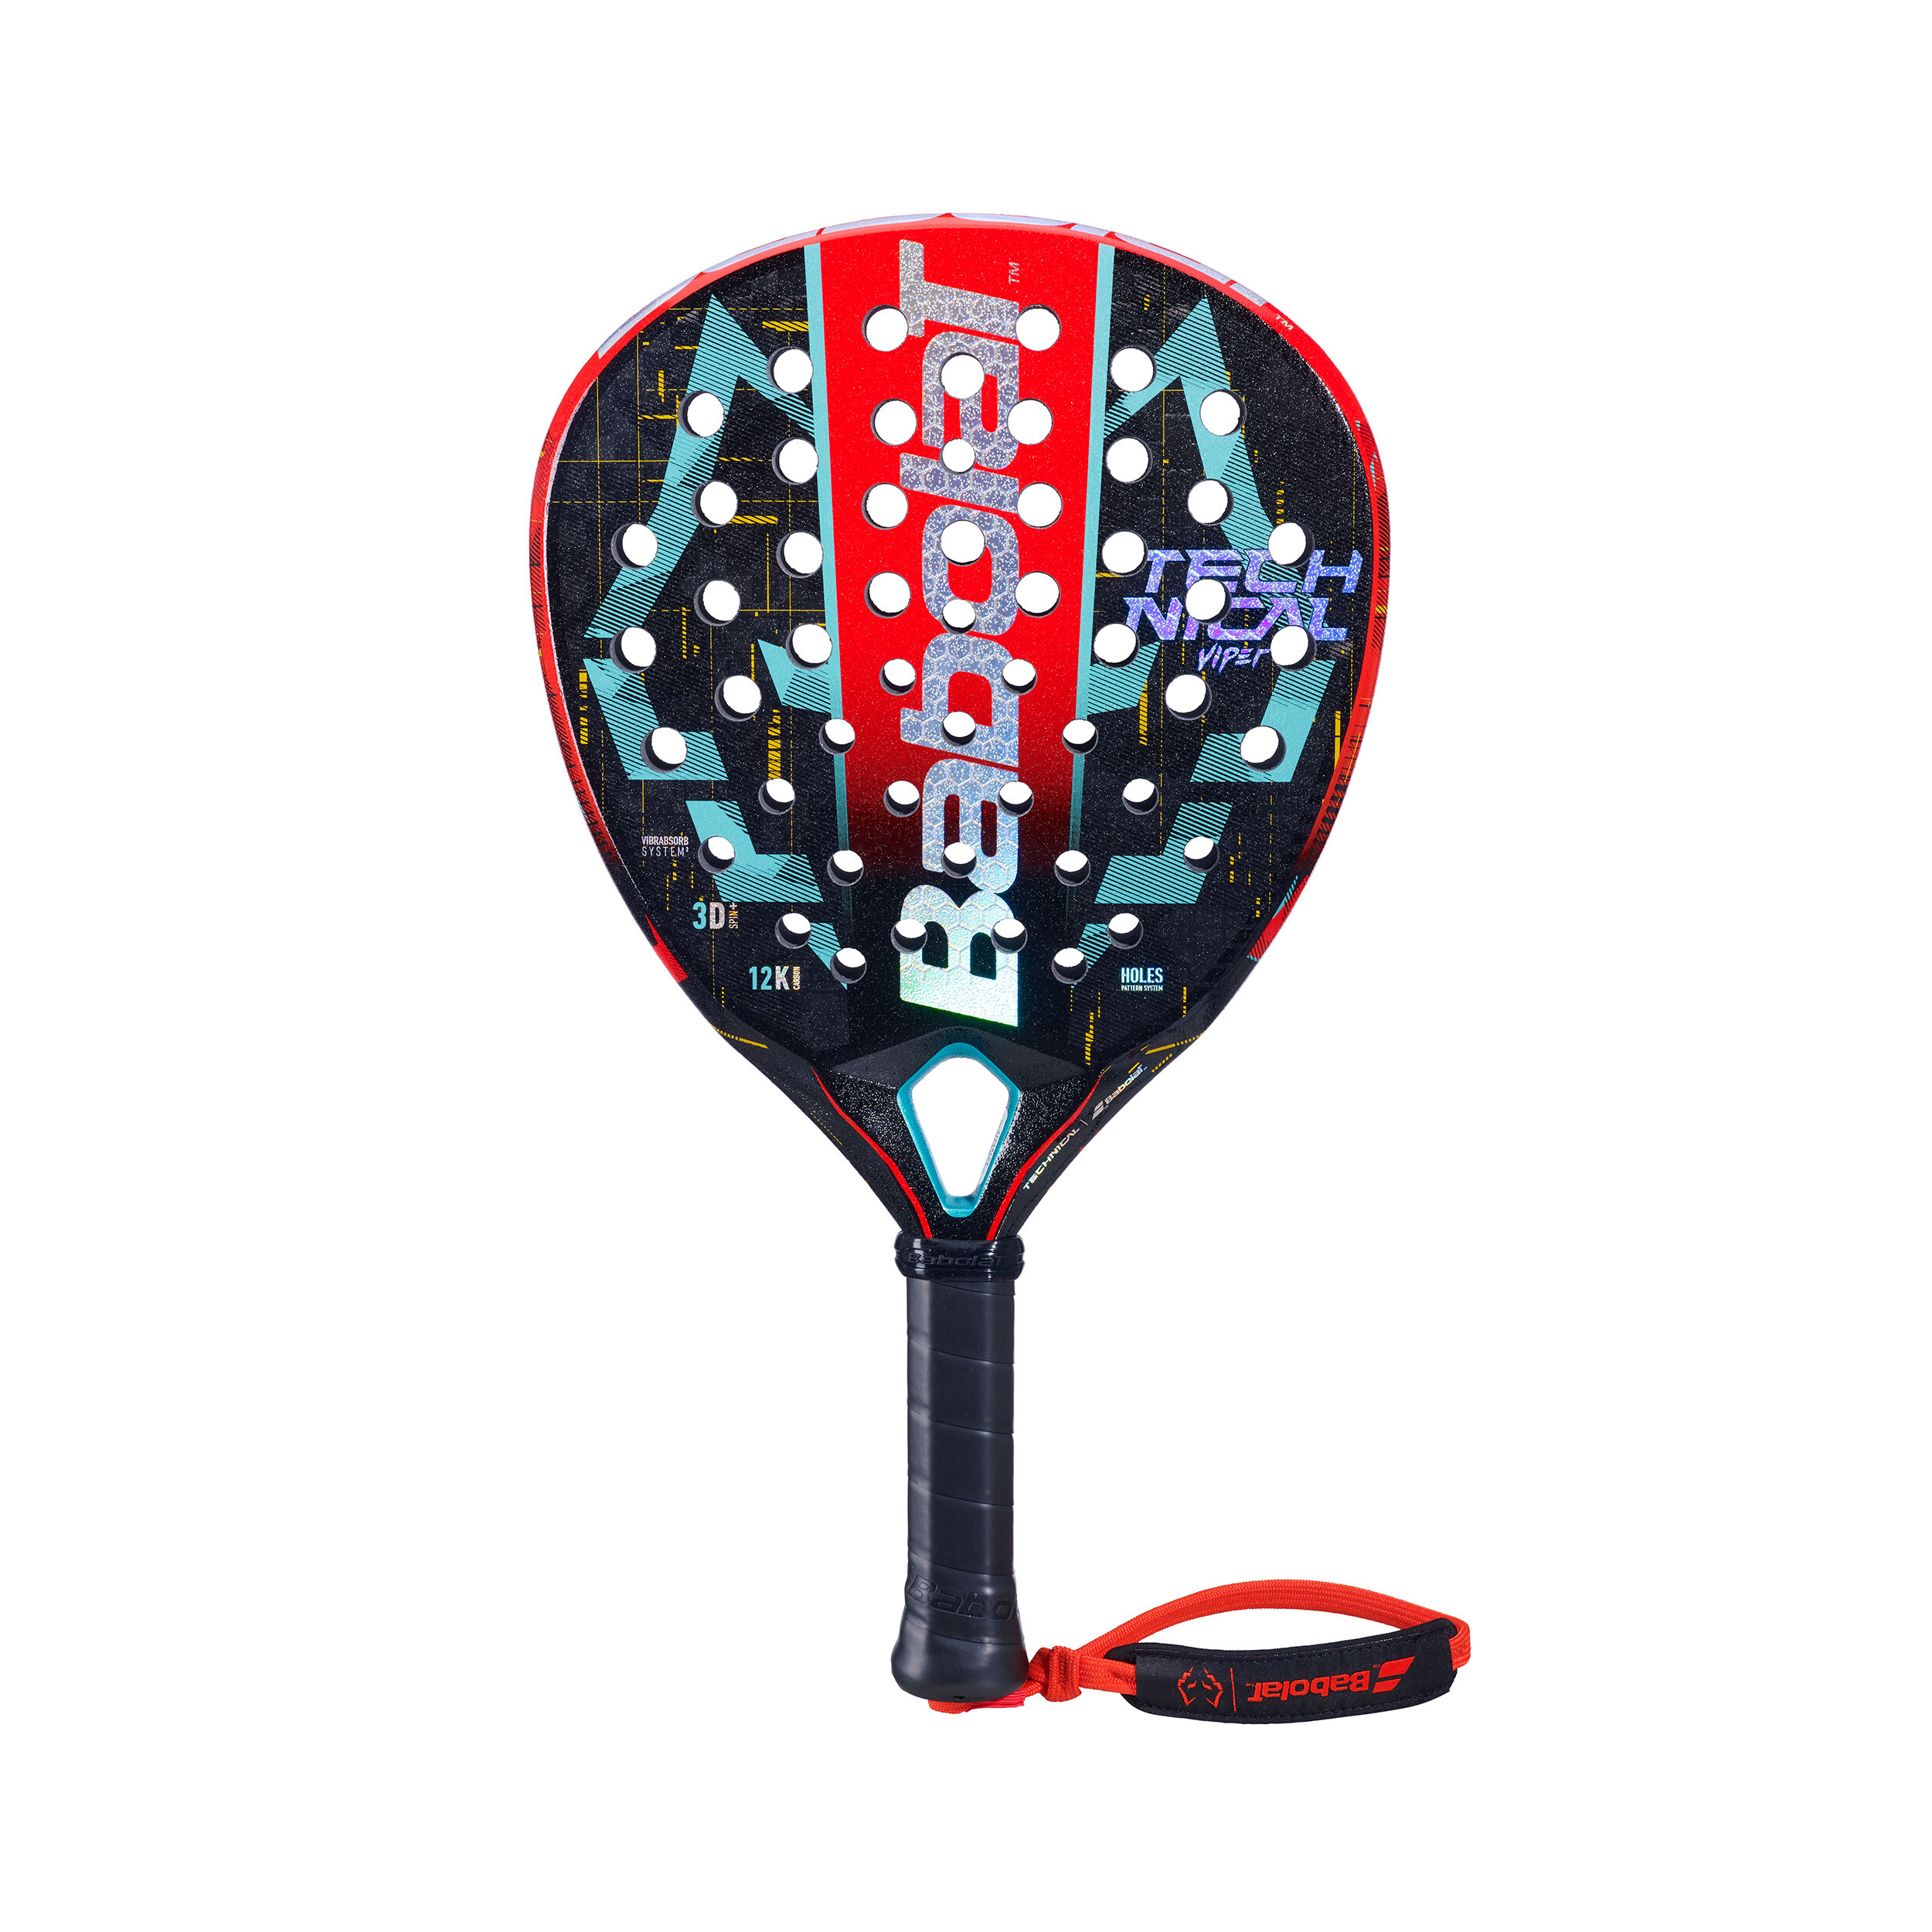 All rackets from Babolat online | Padel-Point